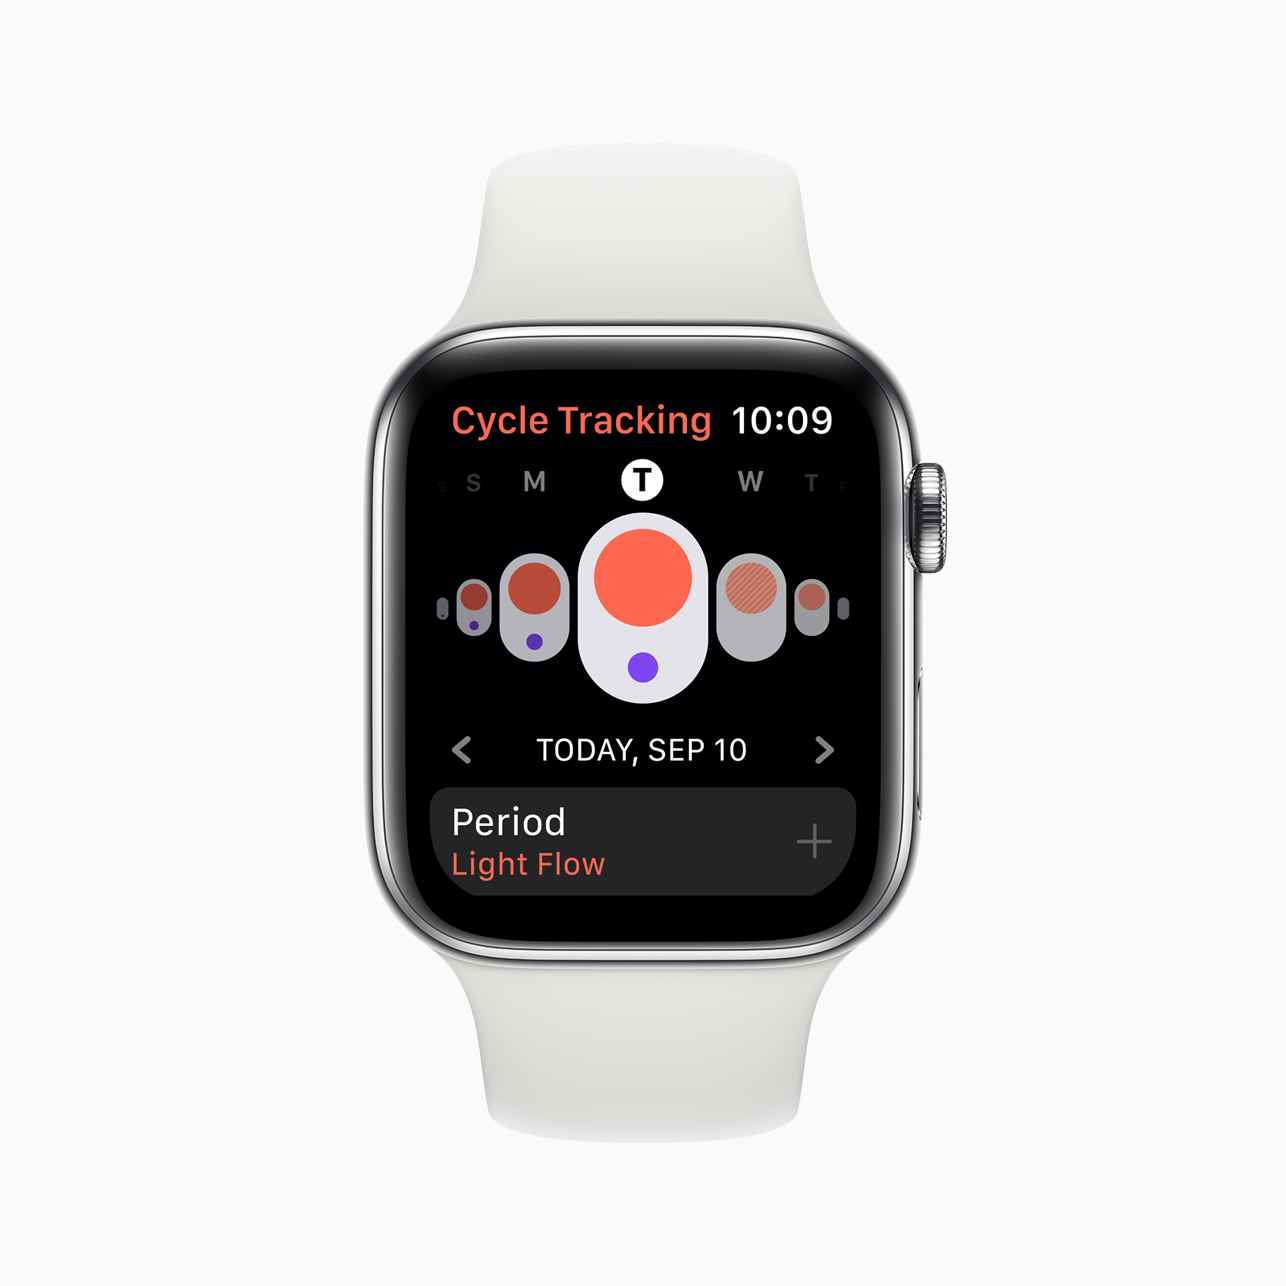 Apple Watch Series 5 – say goodbye to always tapping with its Always-On Retina Display paired with long-lasting battery - Alvinology